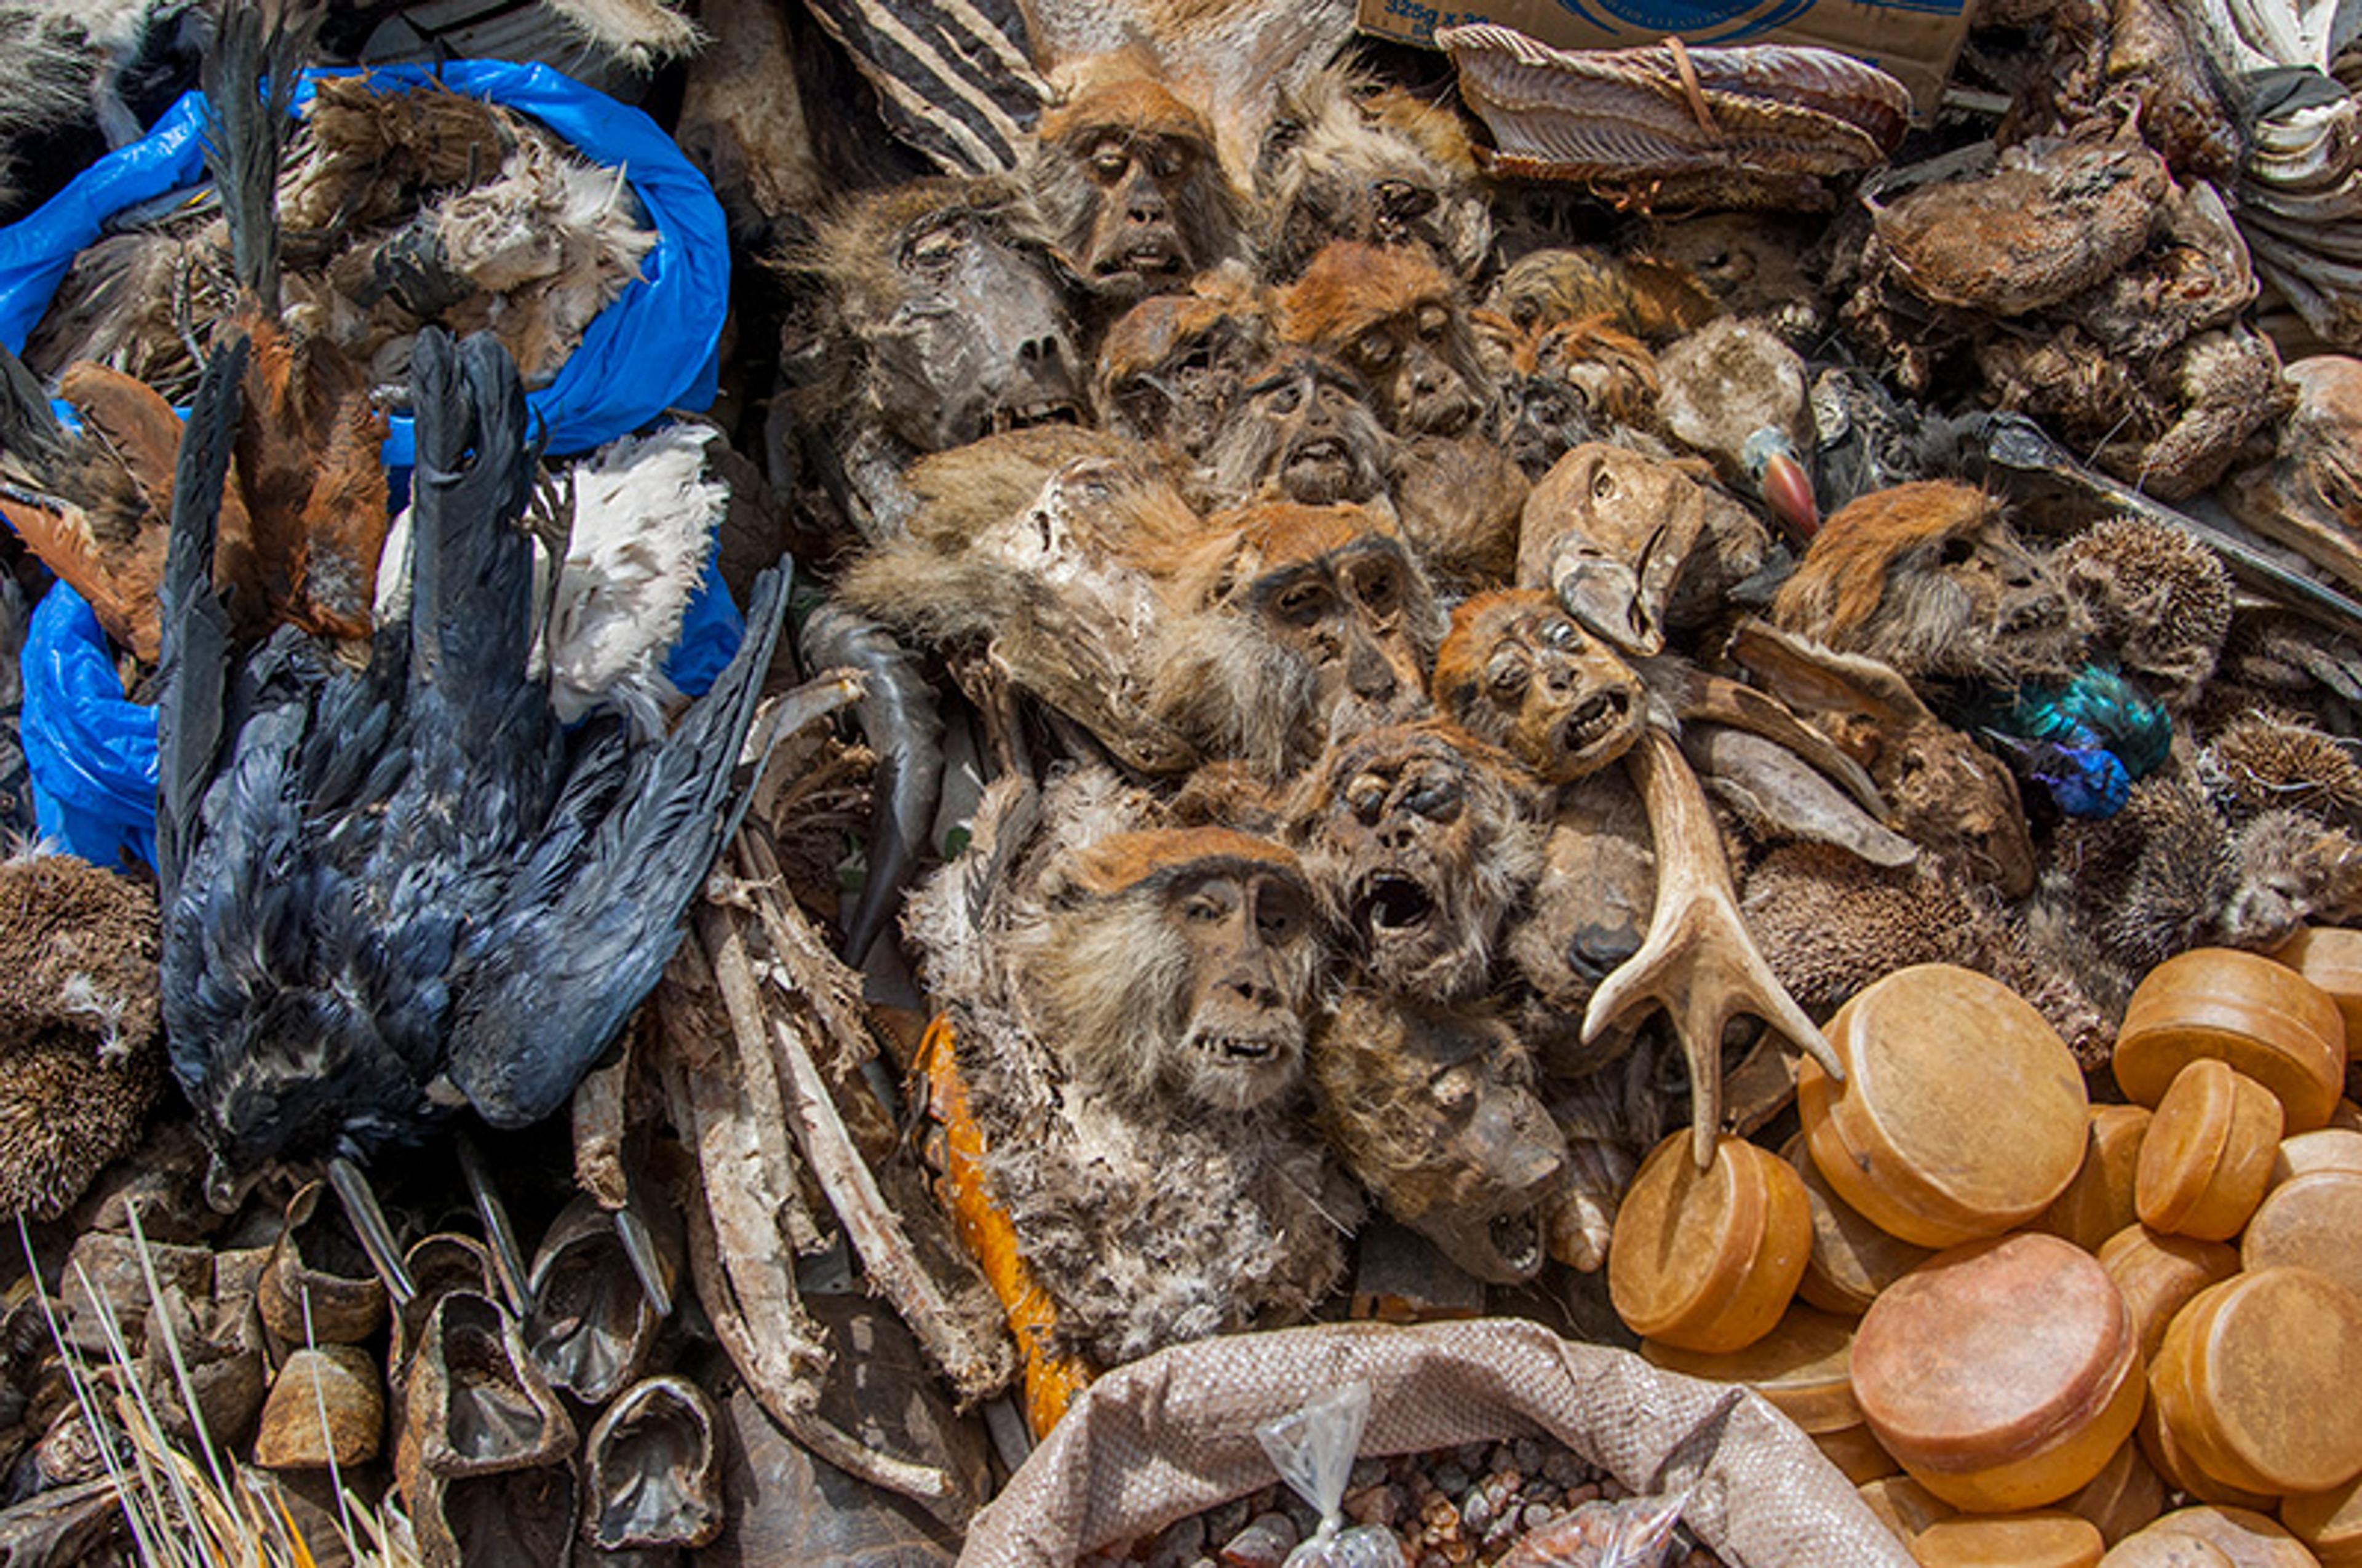 Assorted animal parts including skulls, feathers, and hides are displayed together, some in plastic bags. Various round, orange-coloured objects are also present.